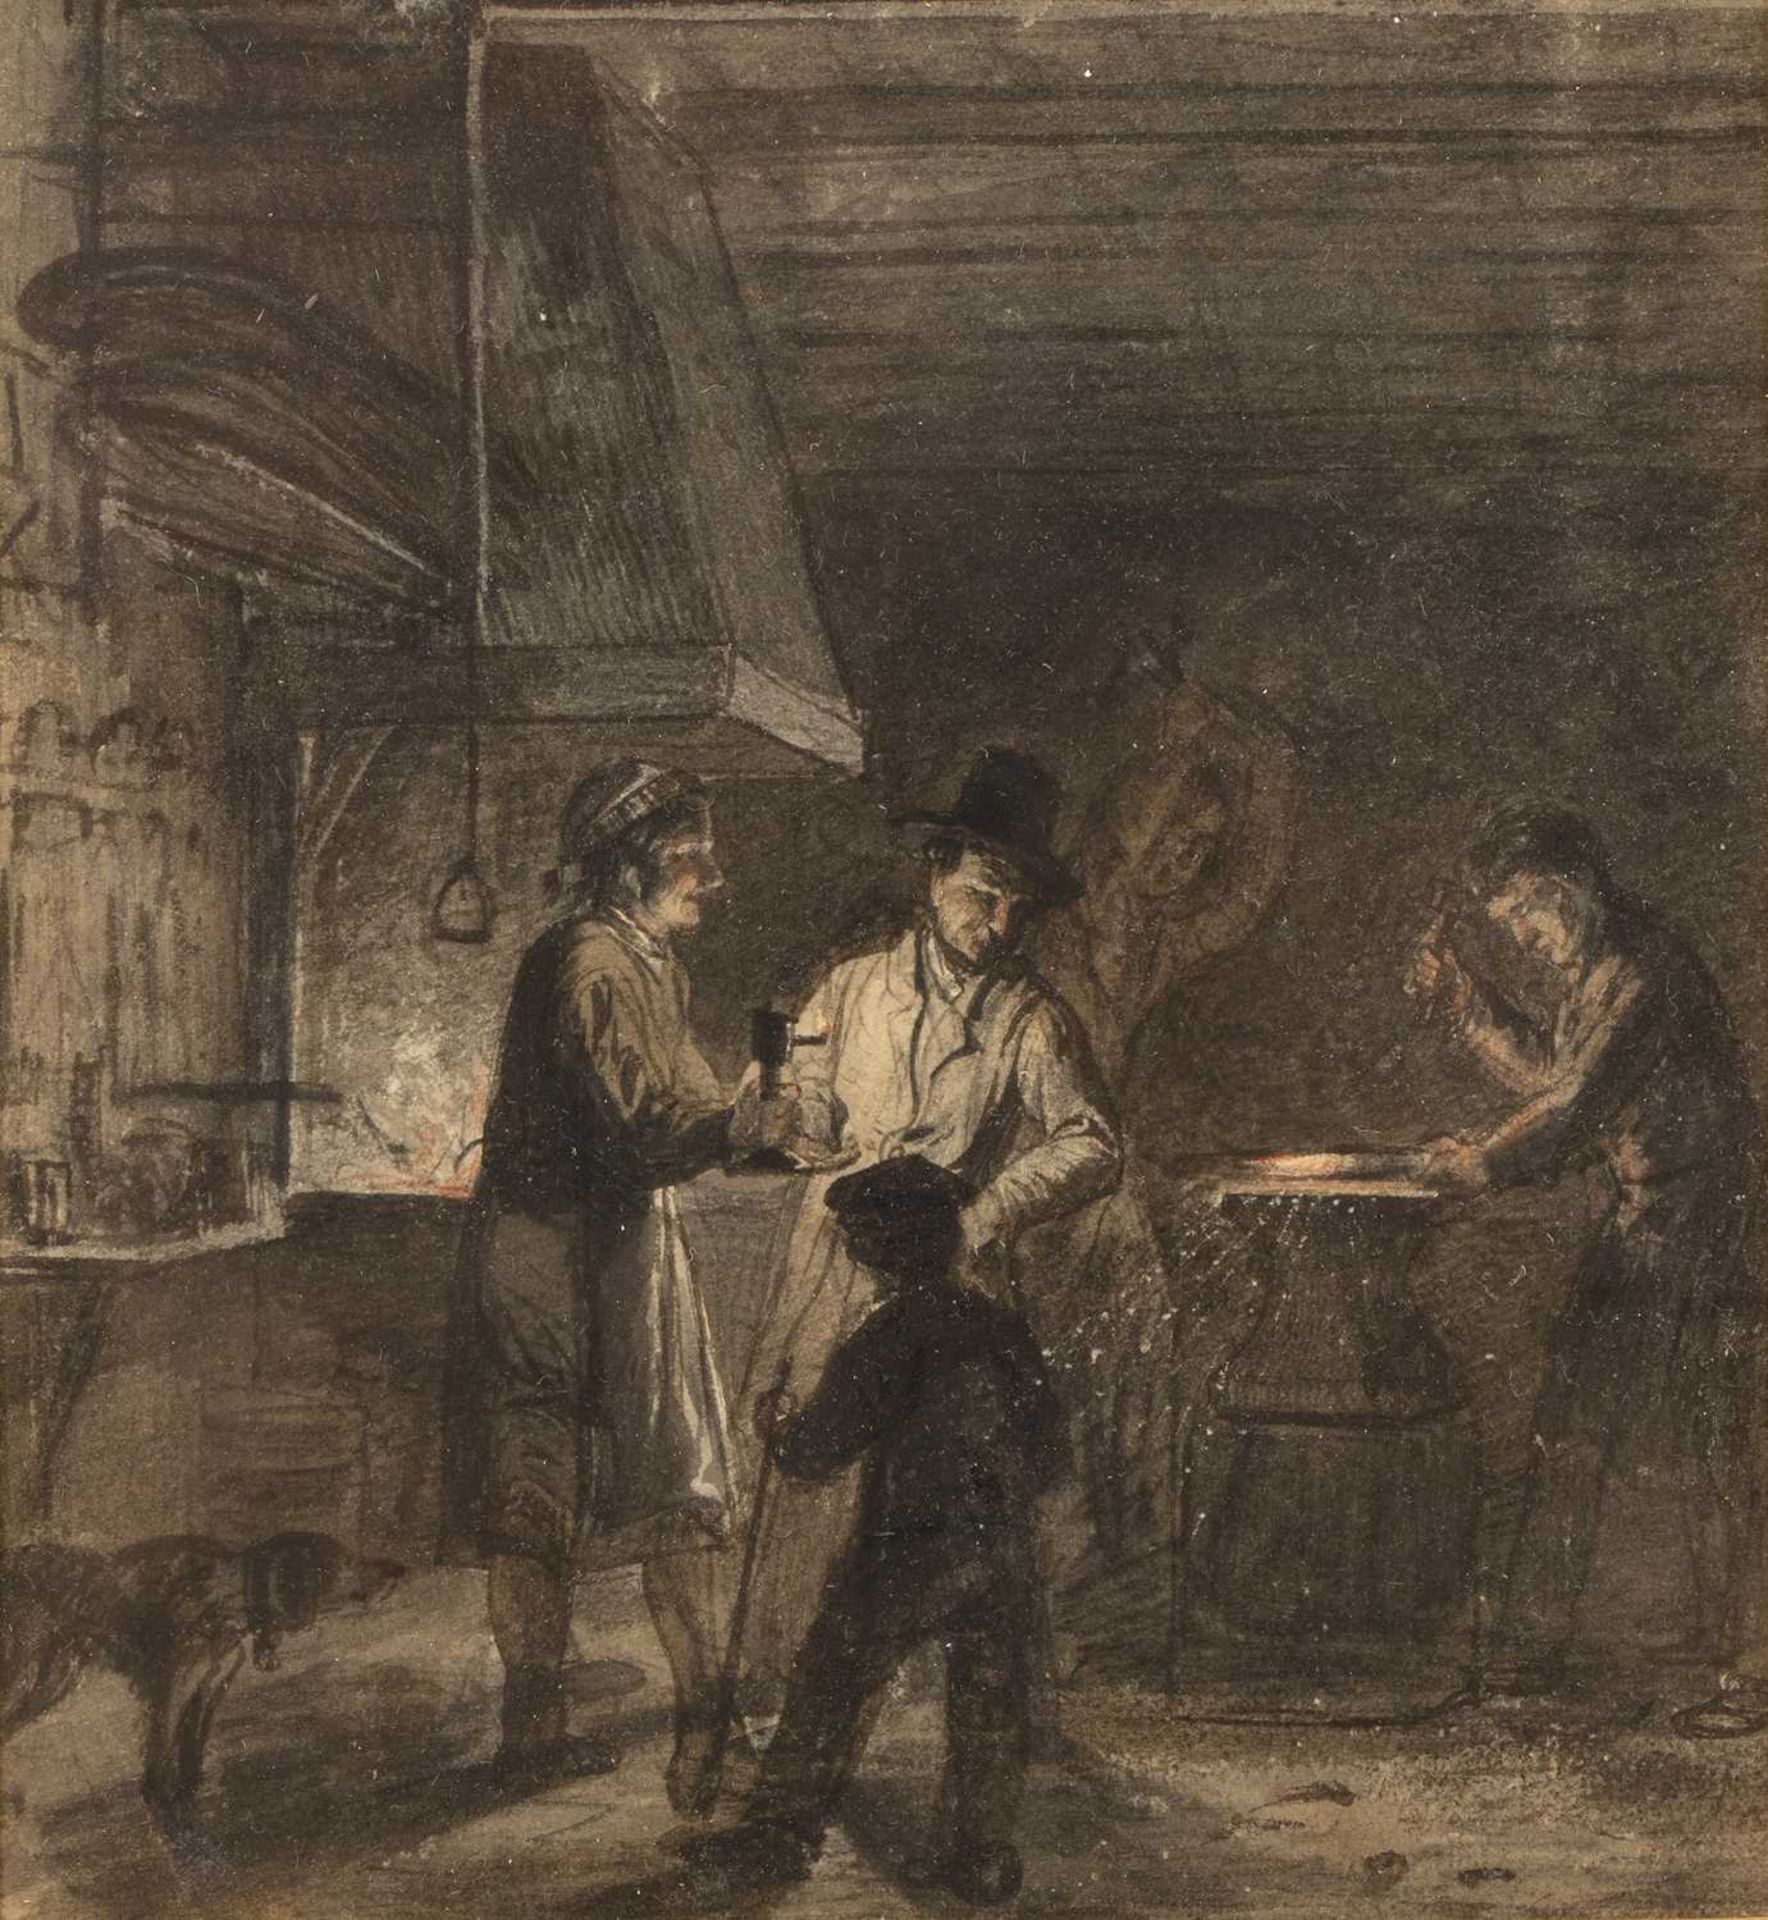 Attributed to George Gillis van Haanen (1807-1876/81) The Blacksmith's Forge, pen, ink and